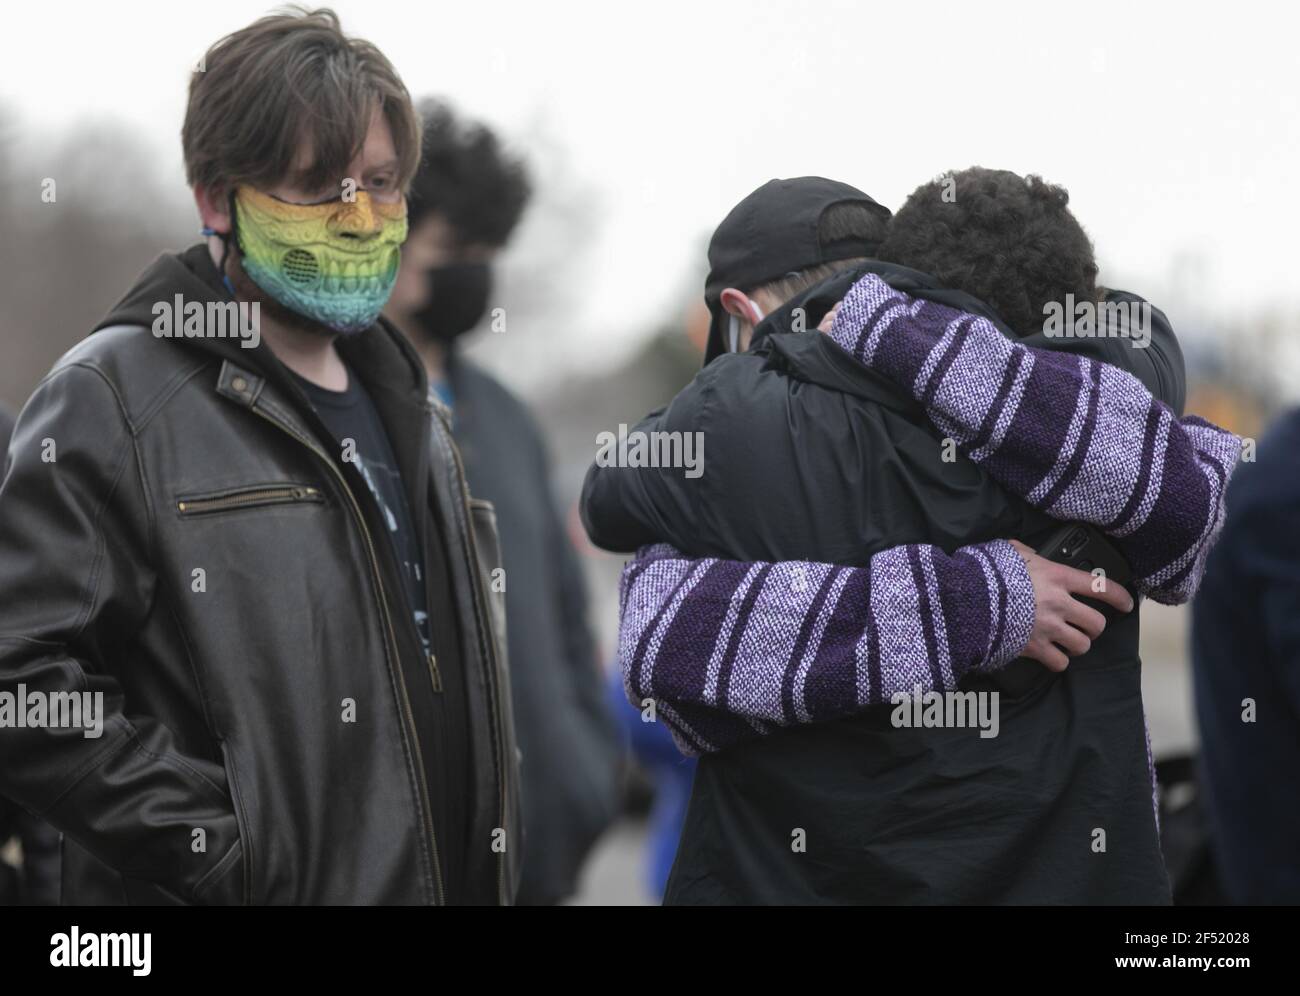 Boulder, United States. 23rd Mar, 2021. A man is comforted after laying flowers outside a King Soopers grocery store where 10 people, including a police officer, were killed in a shooting Monday, in Boulder, Colorado, on Tuesday, March 23, 2021. Police said a suspect, identified as Ahmad Al Aliwi Alissa, was in custody and charged with 10 counts of first-degree murder. Photo by Bob Strong/UPI Credit: UPI/Alamy Live News Stock Photo